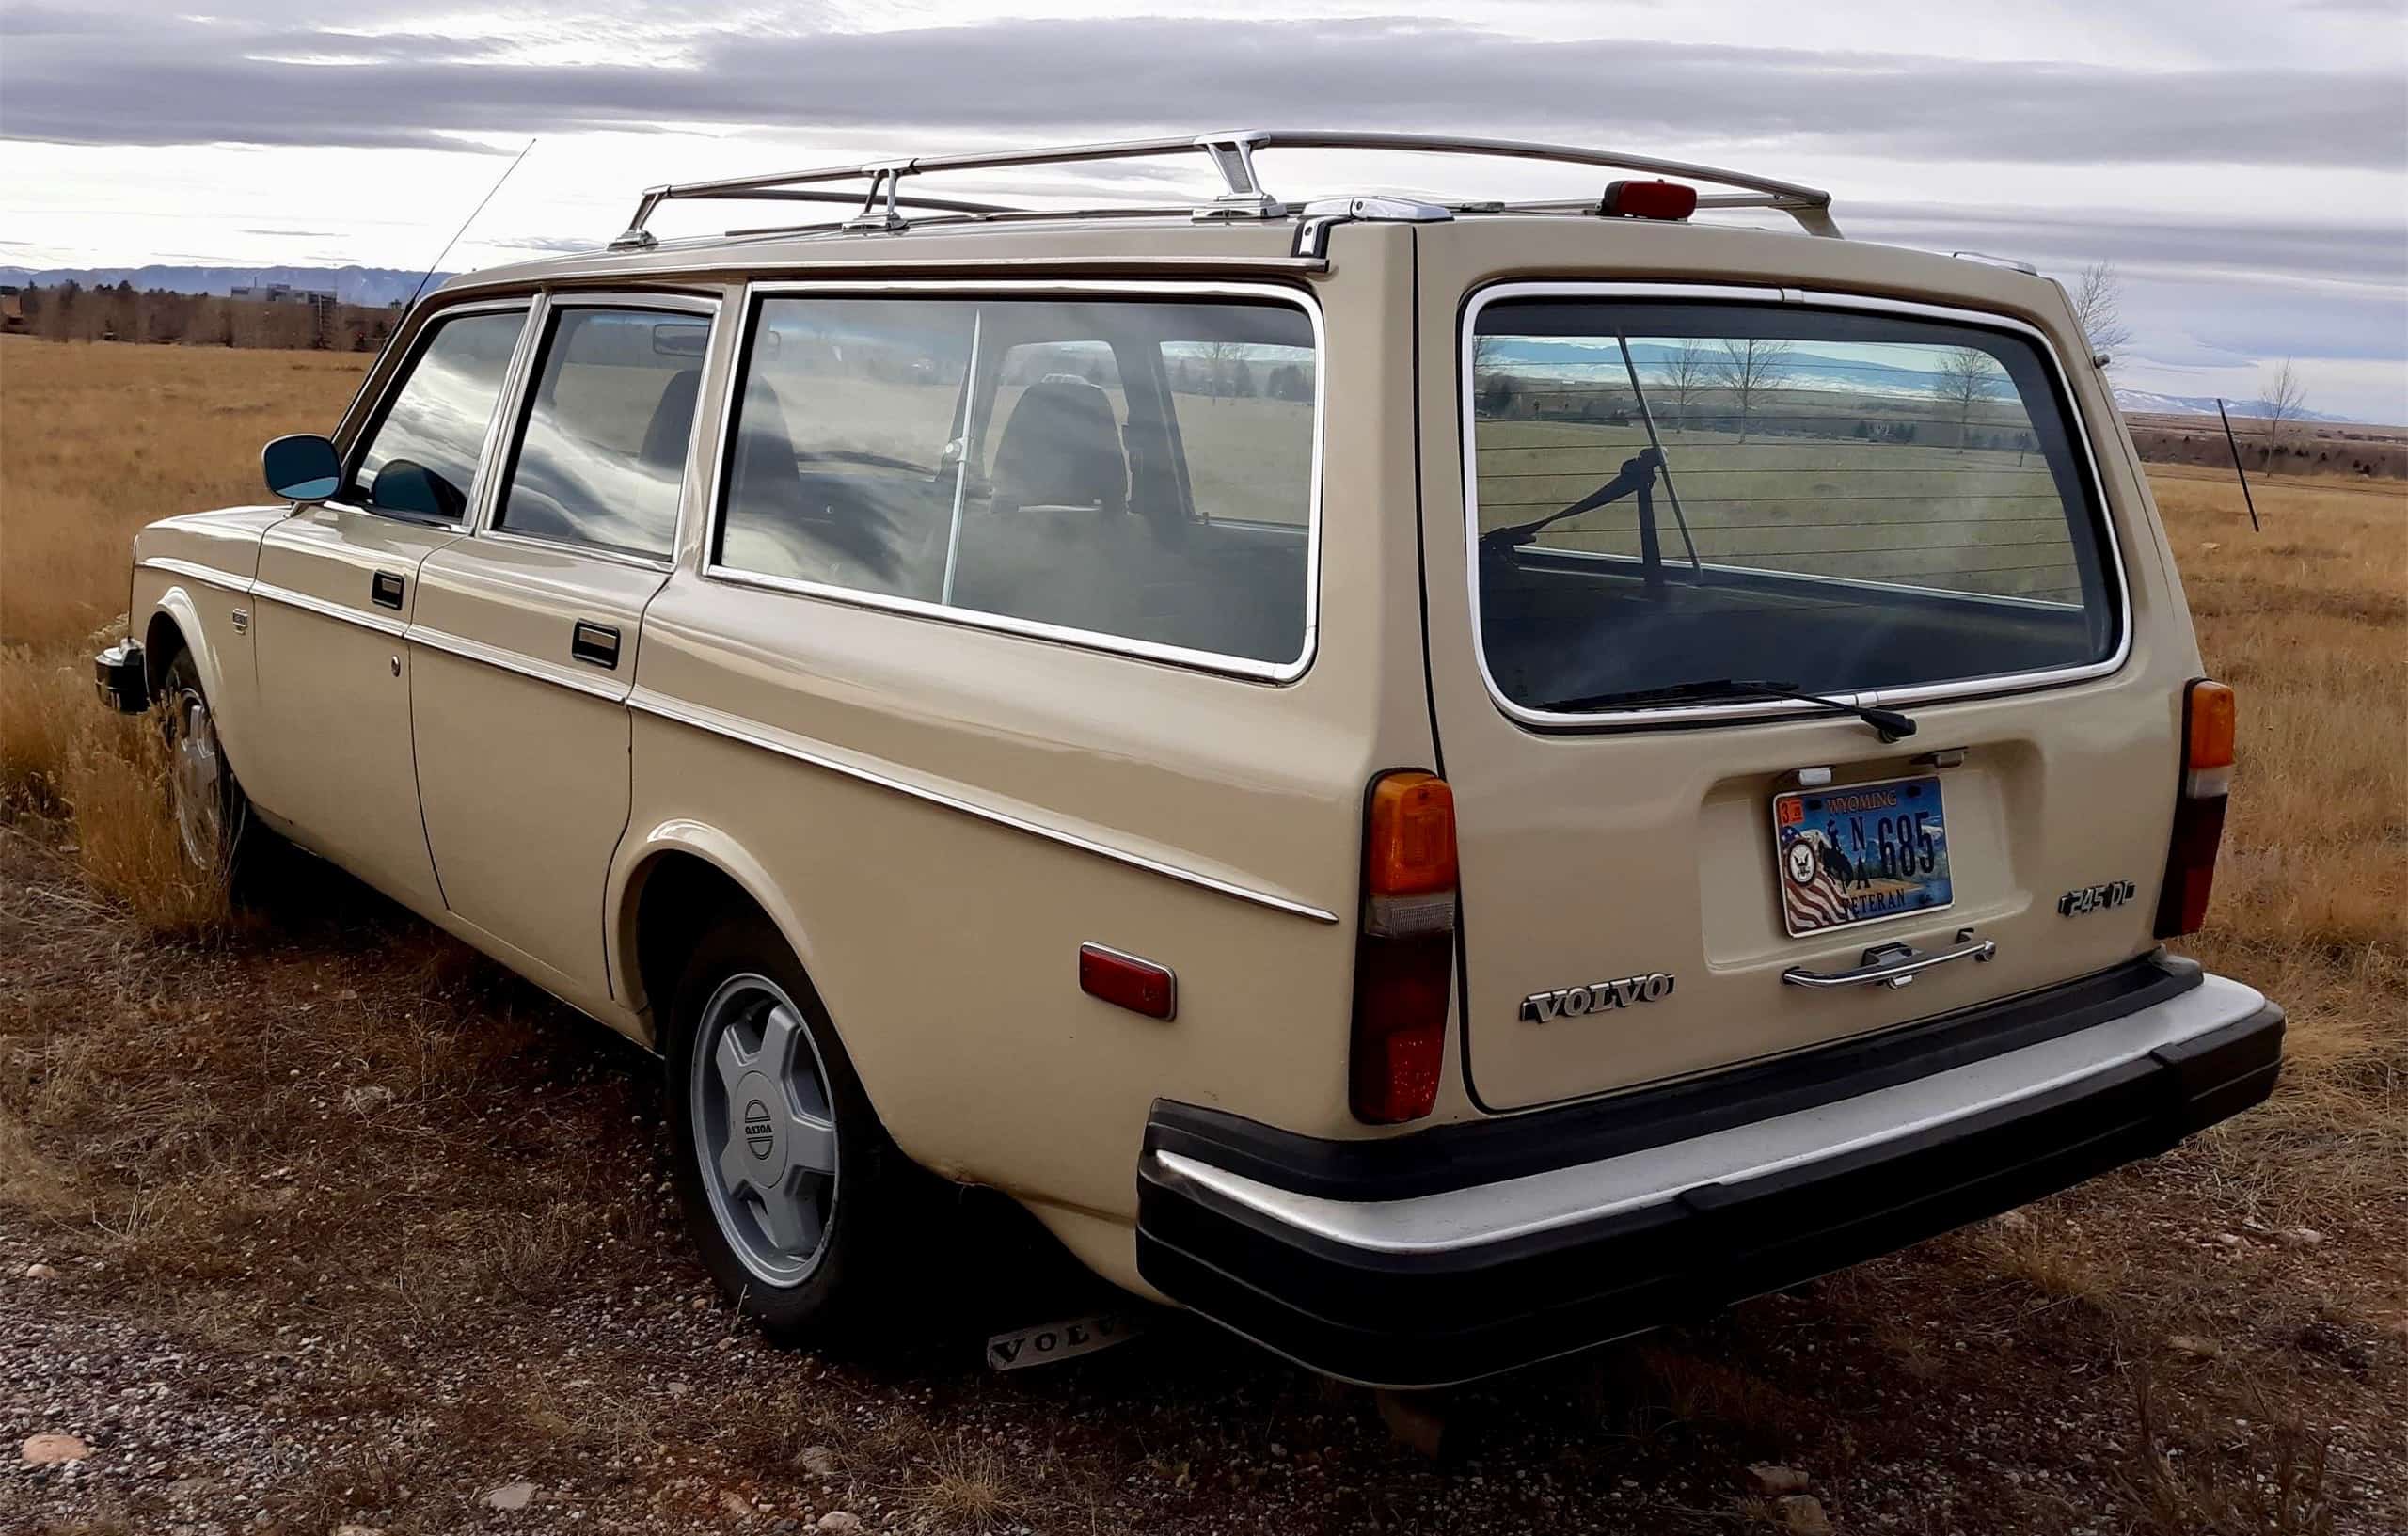 1978 Volvo 245 DL, After 285,000 miles, this station wagon is a proven performer, ClassicCars.com Journal